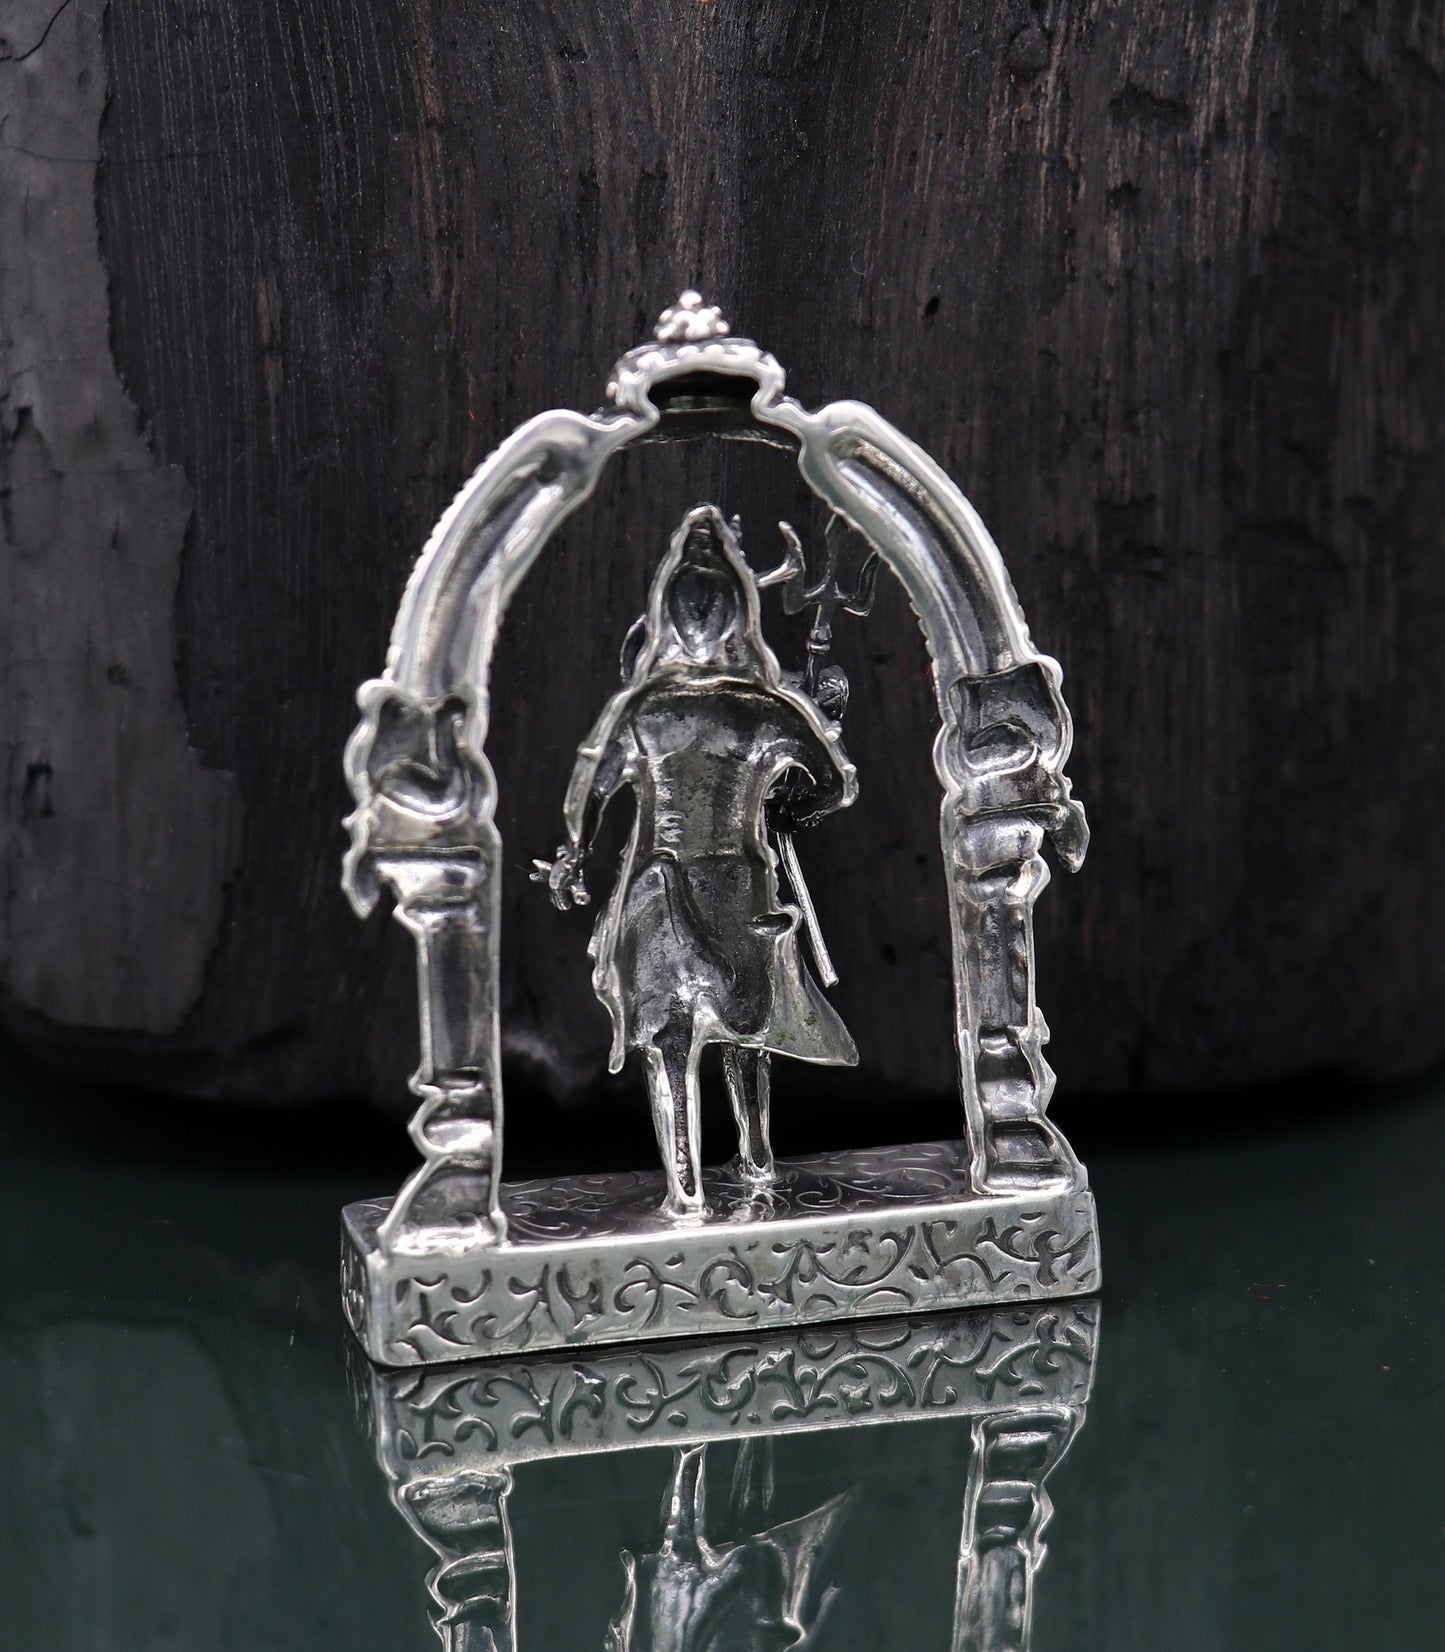 925 Sterling silver handmade vintage look indian hindu idols Lord Shiva with trident stunning statue figurine, puja articles best gift art09 - TRIBAL ORNAMENTS